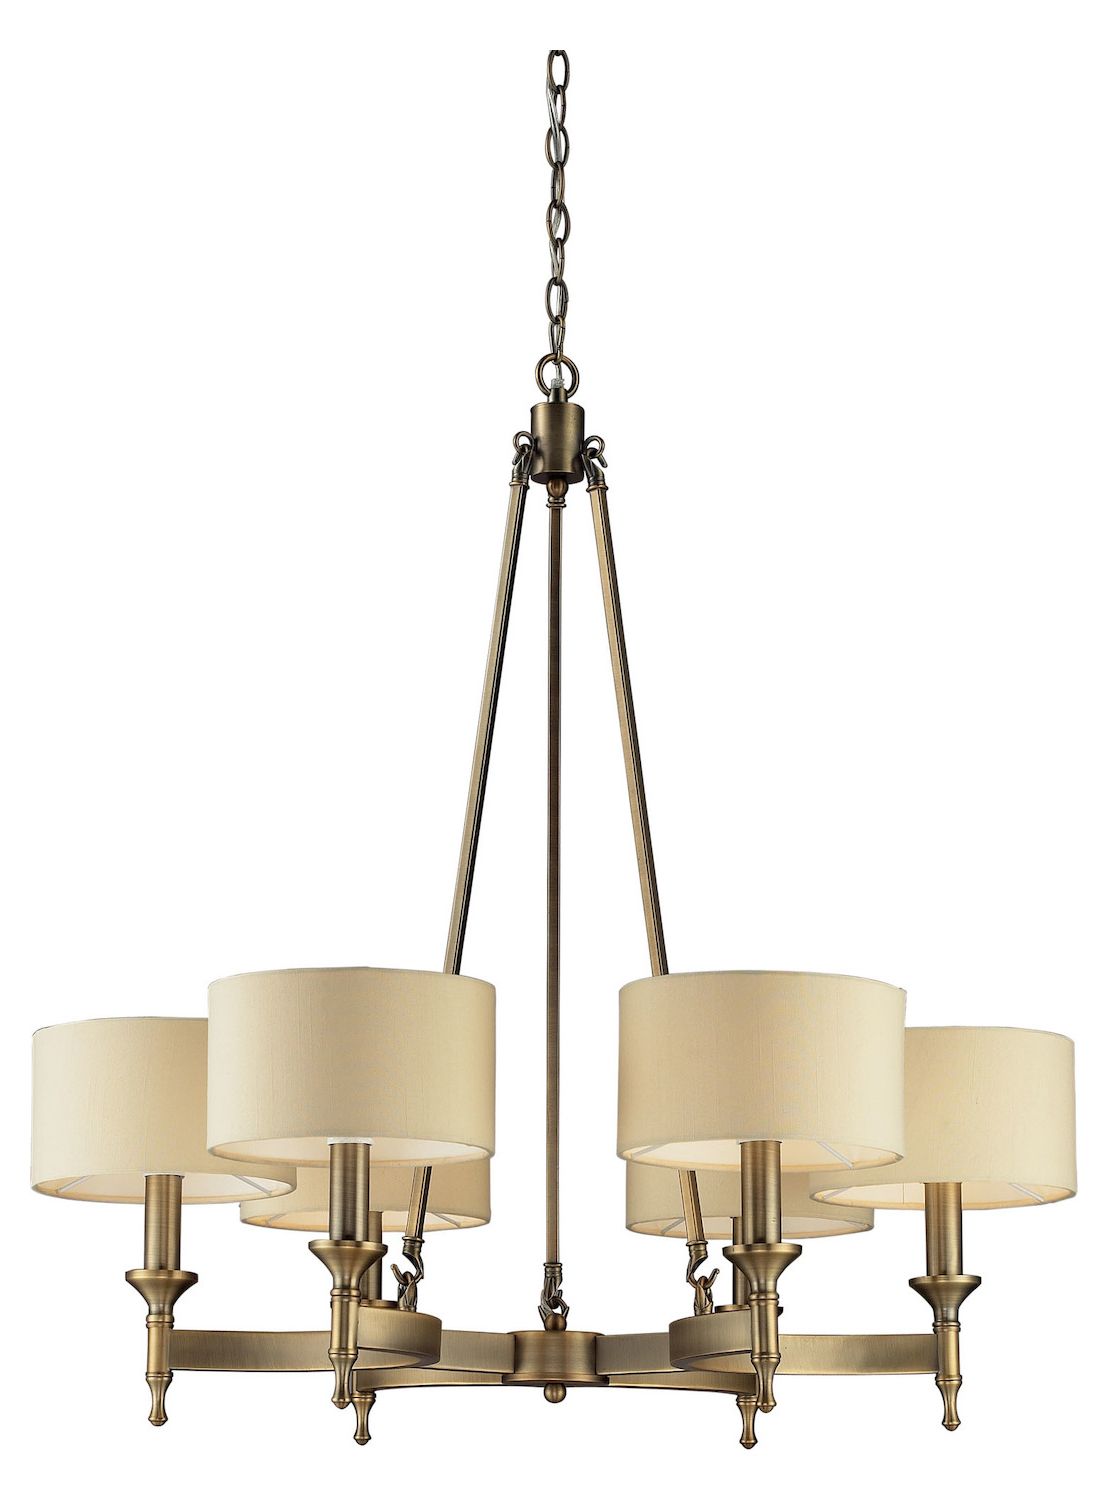 Elk Lighting Six Light Antique Brass Drum Shade Chandelier With Newest Natural Brass Six Light Chandeliers (View 18 of 20)